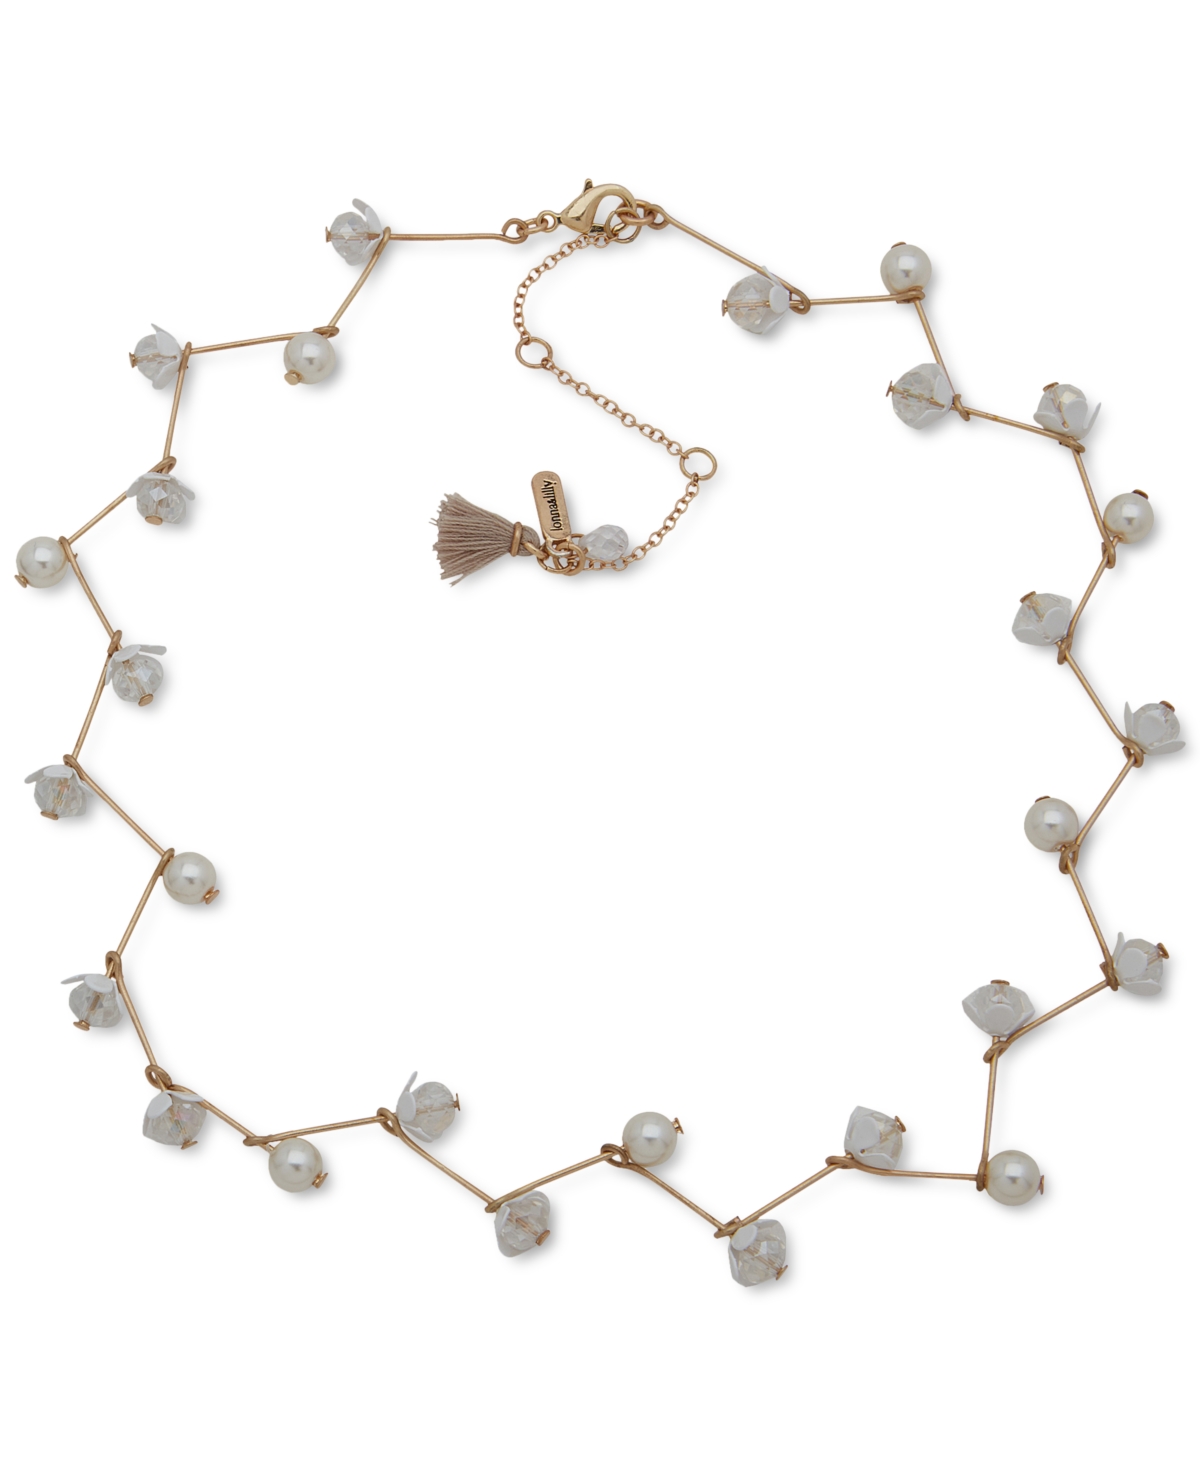 Lonna & Lilly Gold-tone Crystal Flower & Imitation Pearl Zigzag Collar Necklace, 16" + 3" Extender In White